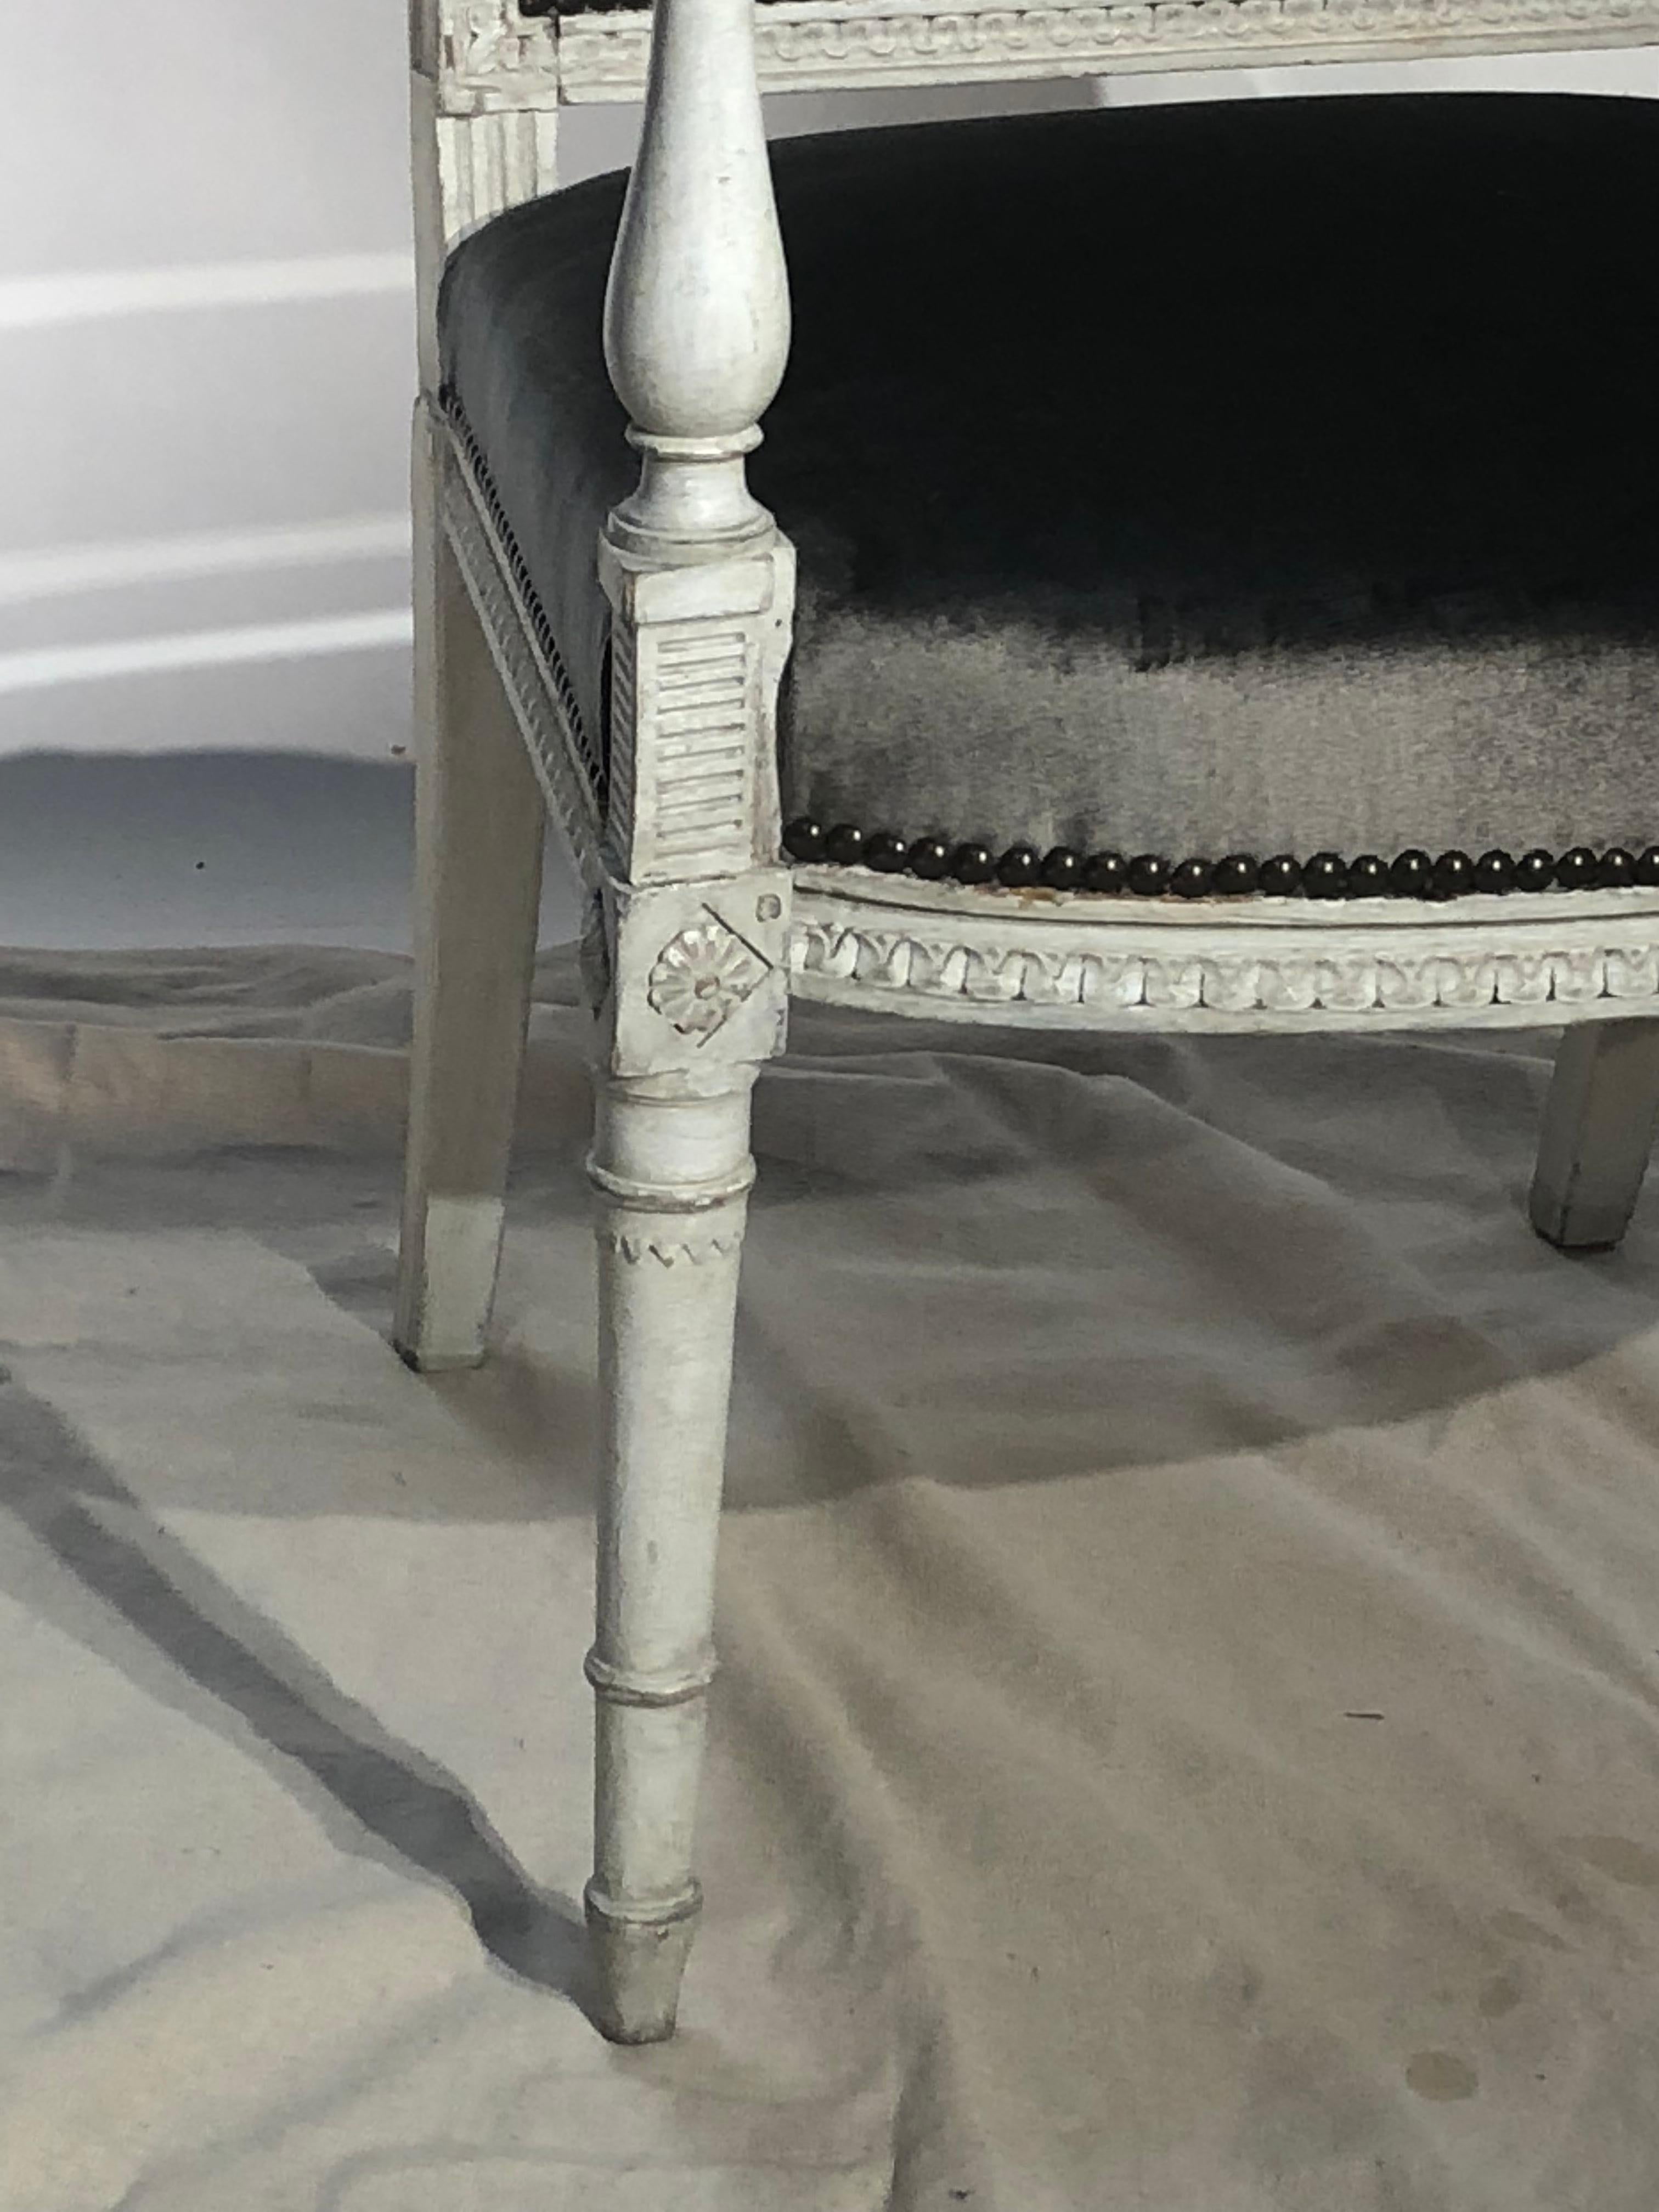 A fine Louis XVI period Fauteuil in grey painted finish, by Jacob Frères, the sons of George Jacob. The chair is stamped on the underside with their mark and is in excellent condition. It was purchased from a NYC estate that was decorated by Sister